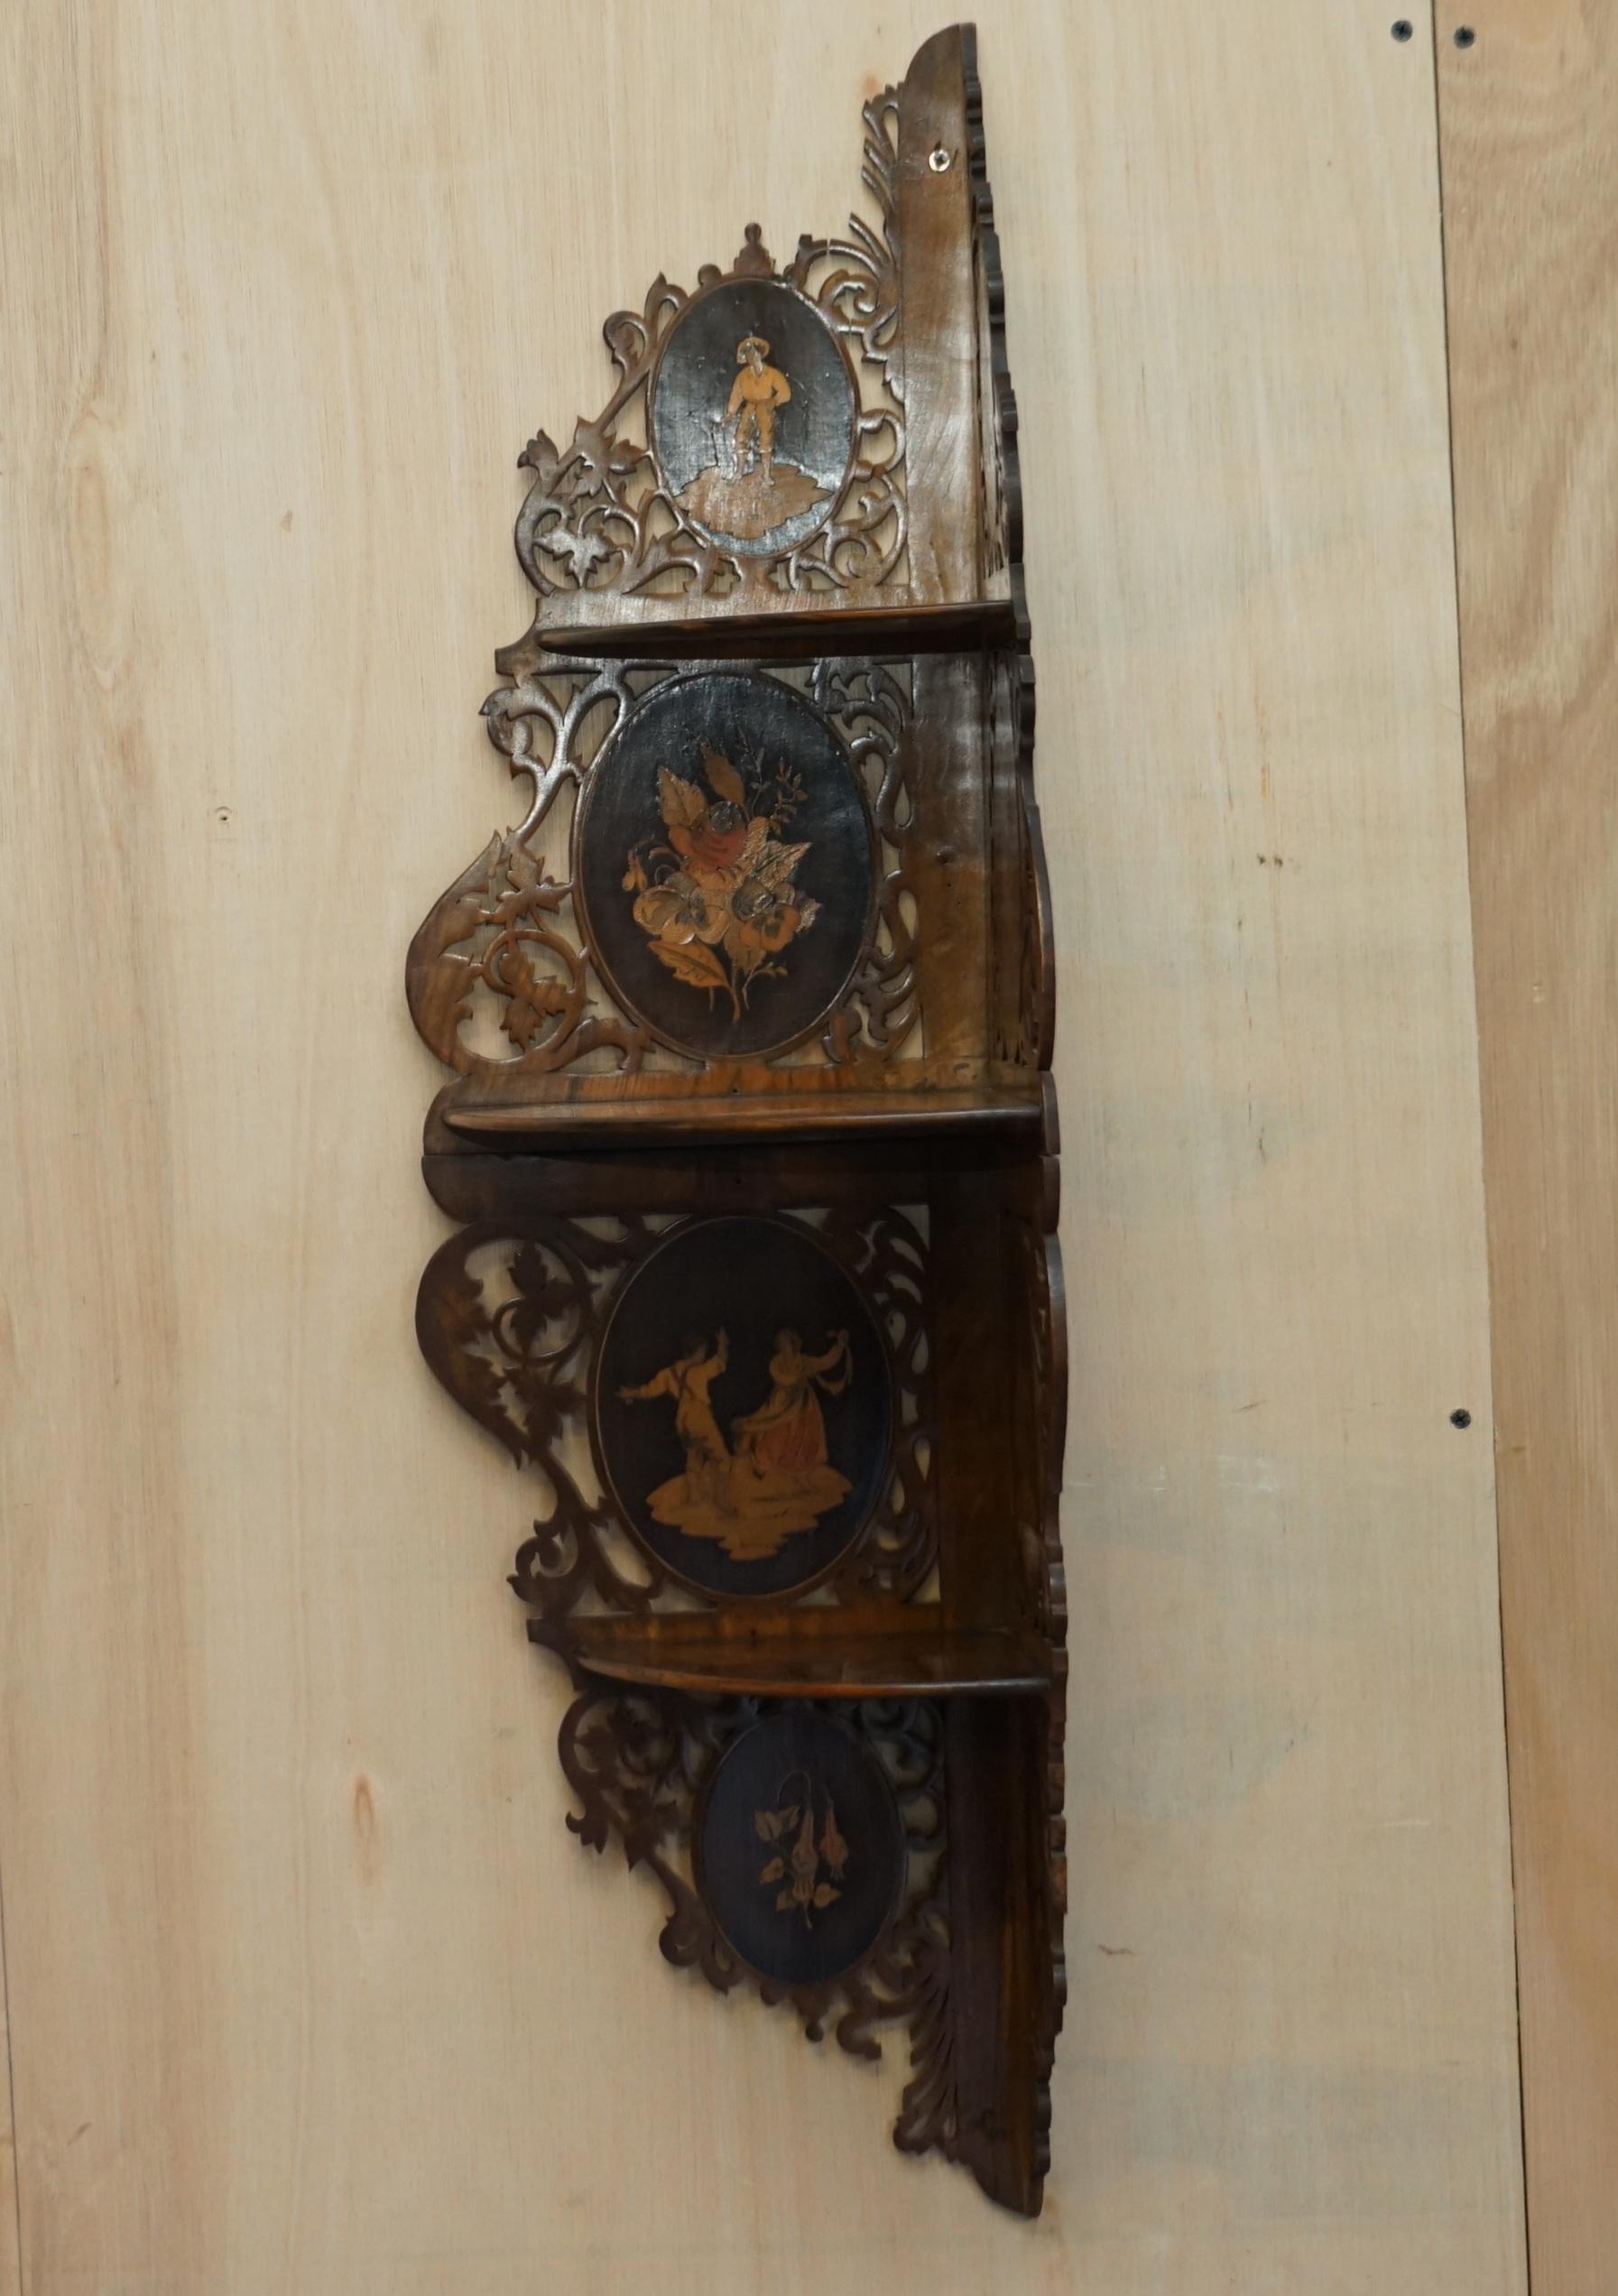 We are delighted to offer for sale this lovely Italian circa 1880 mahogany and walnut inlaid corner hanging book shelf 

A very good looking and decorative piece, ideally suited for displaying trinkets 

This has been cleaned waxed and polished